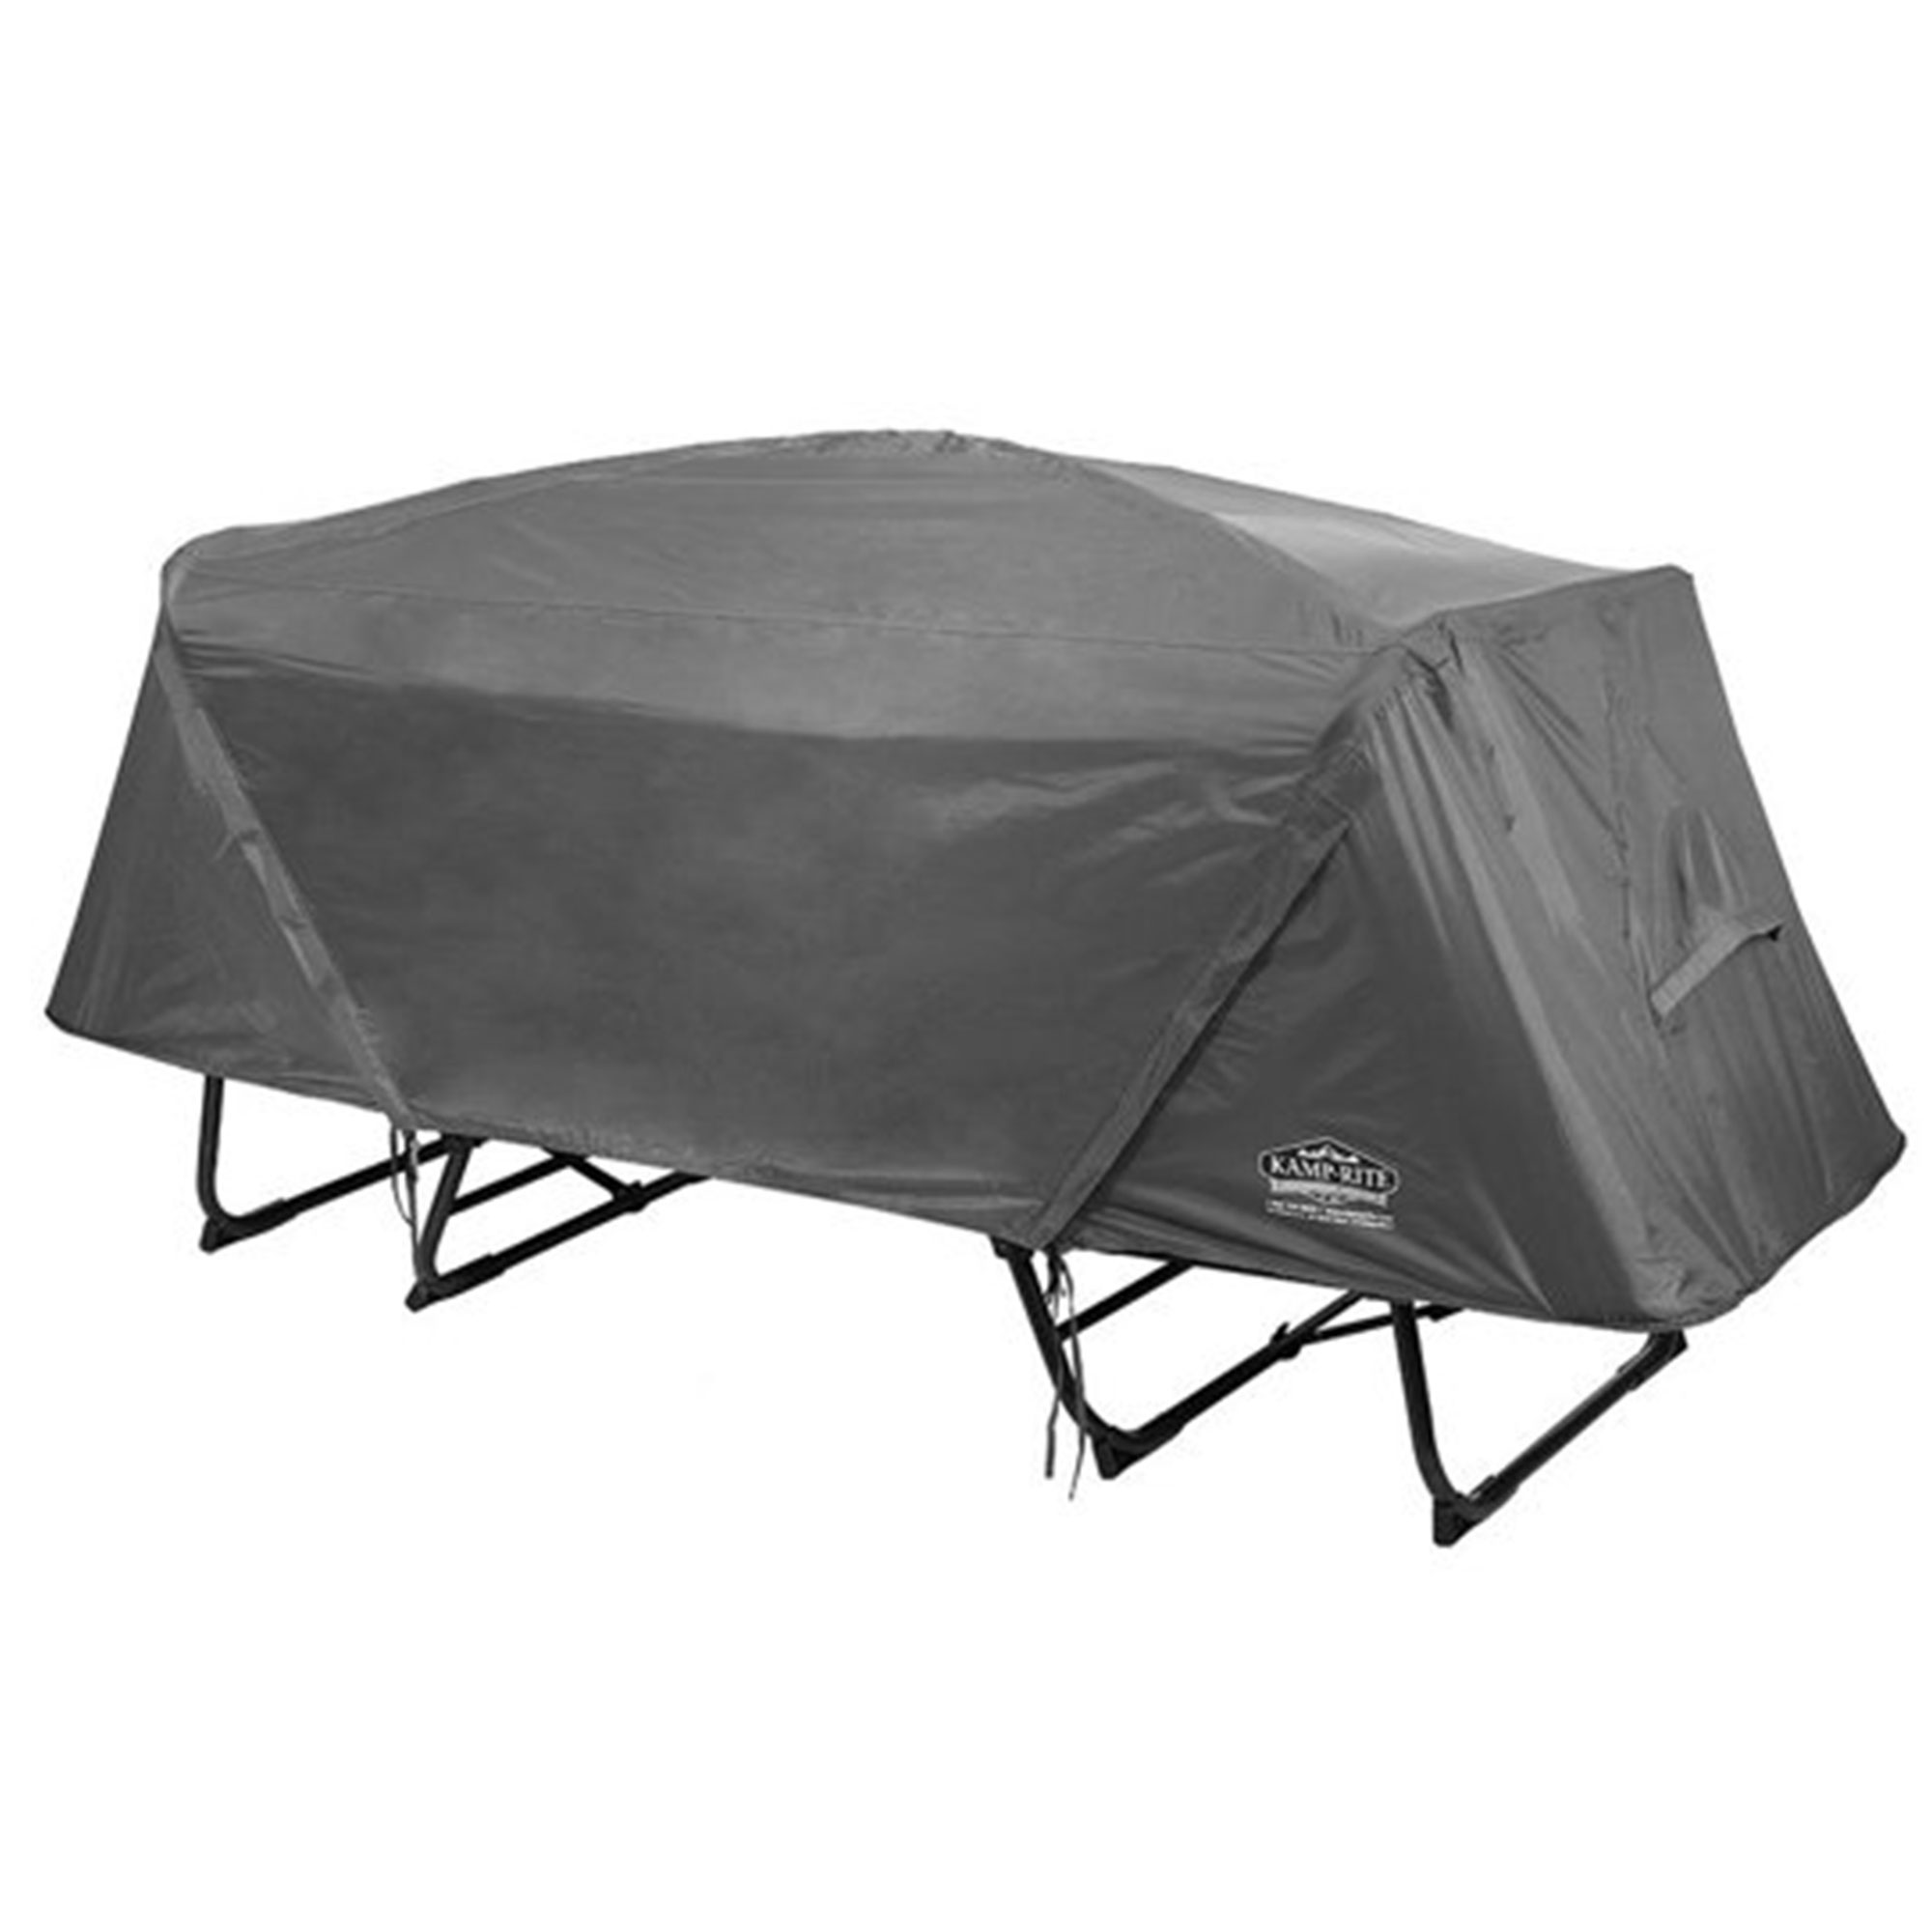 Kamp-Rite Oversized Quick Setup 1 Person Cot, Chair, & Tent w/Domed Top - image 5 of 8